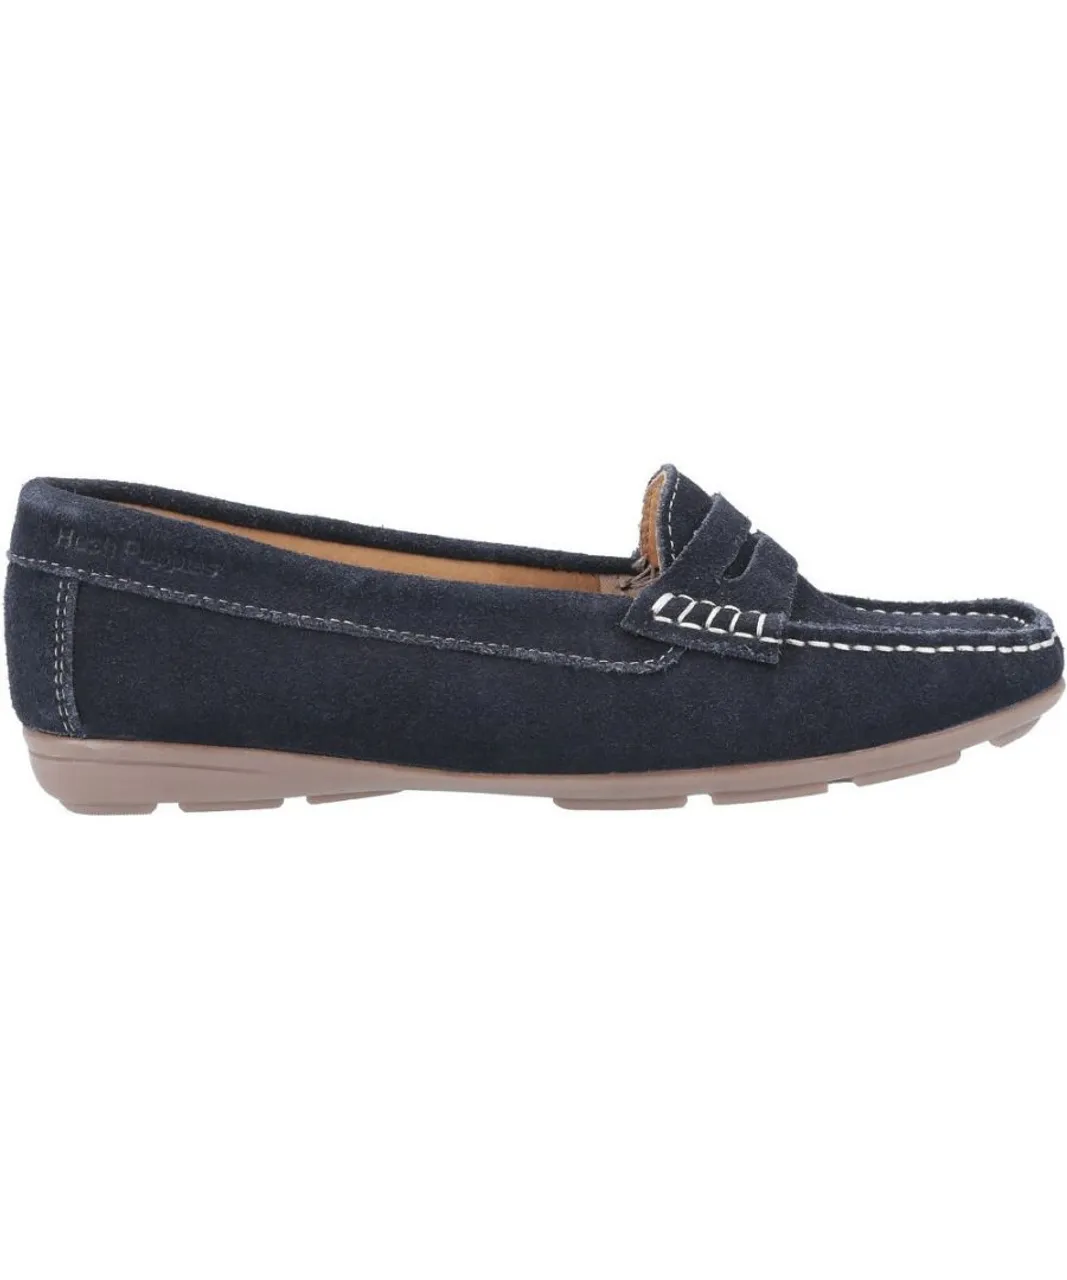 Hush Puppies Womens Margot Lightweight Slip On Loafer Shoes - Navy Leather